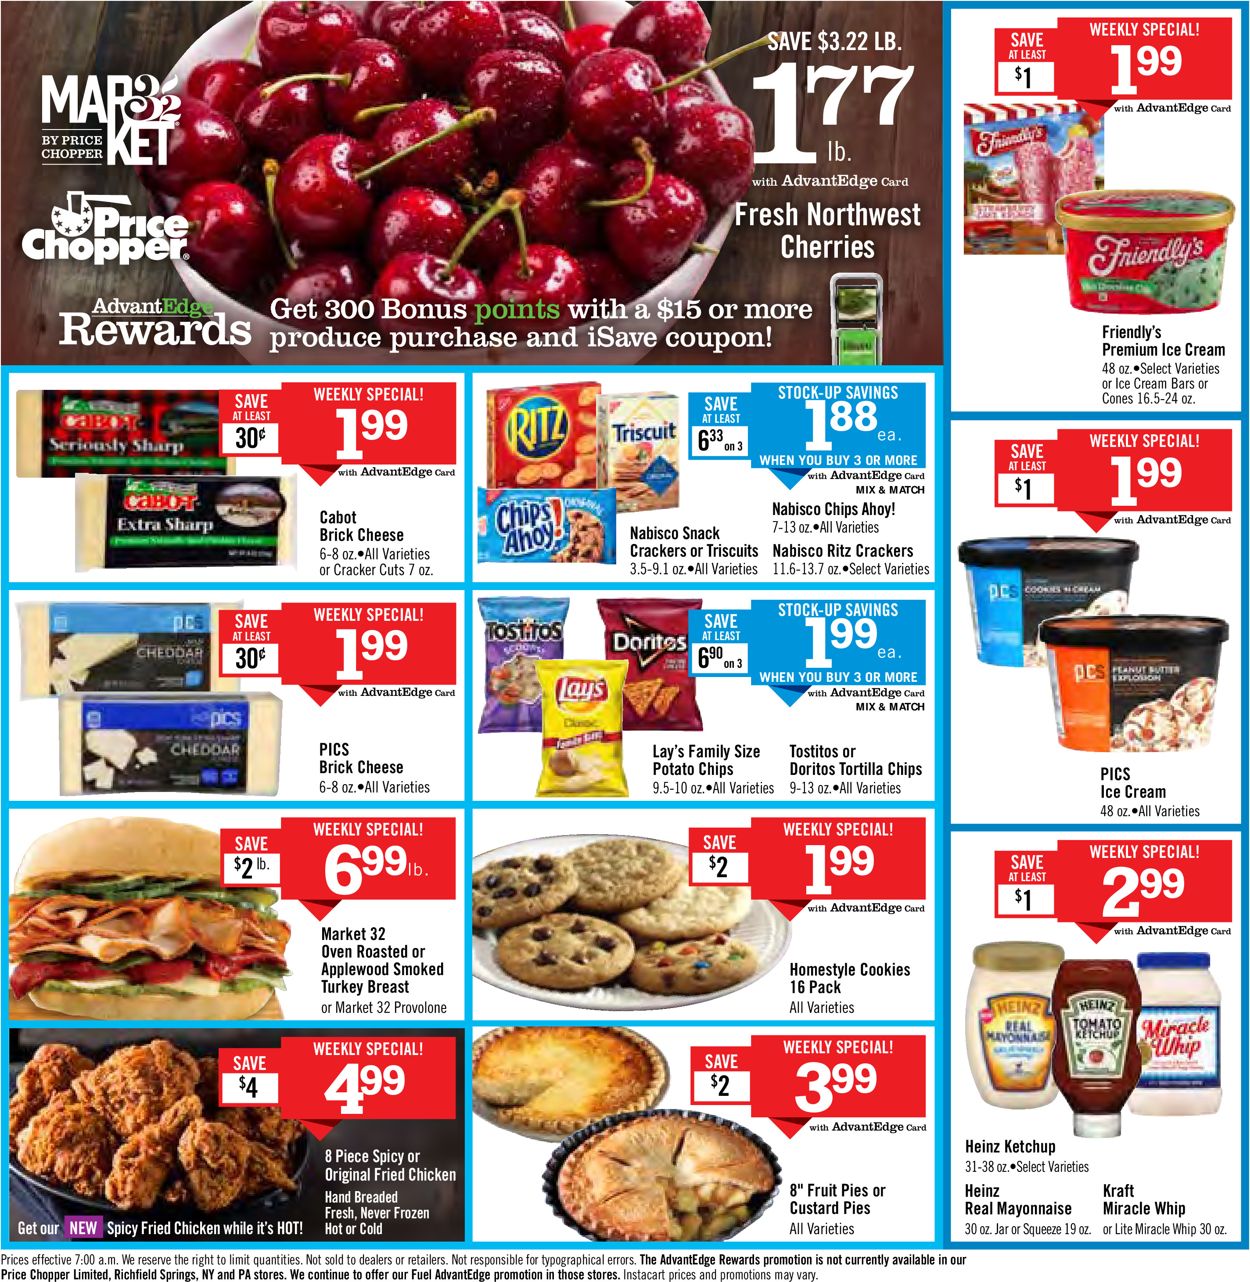 price chopper weekly ad